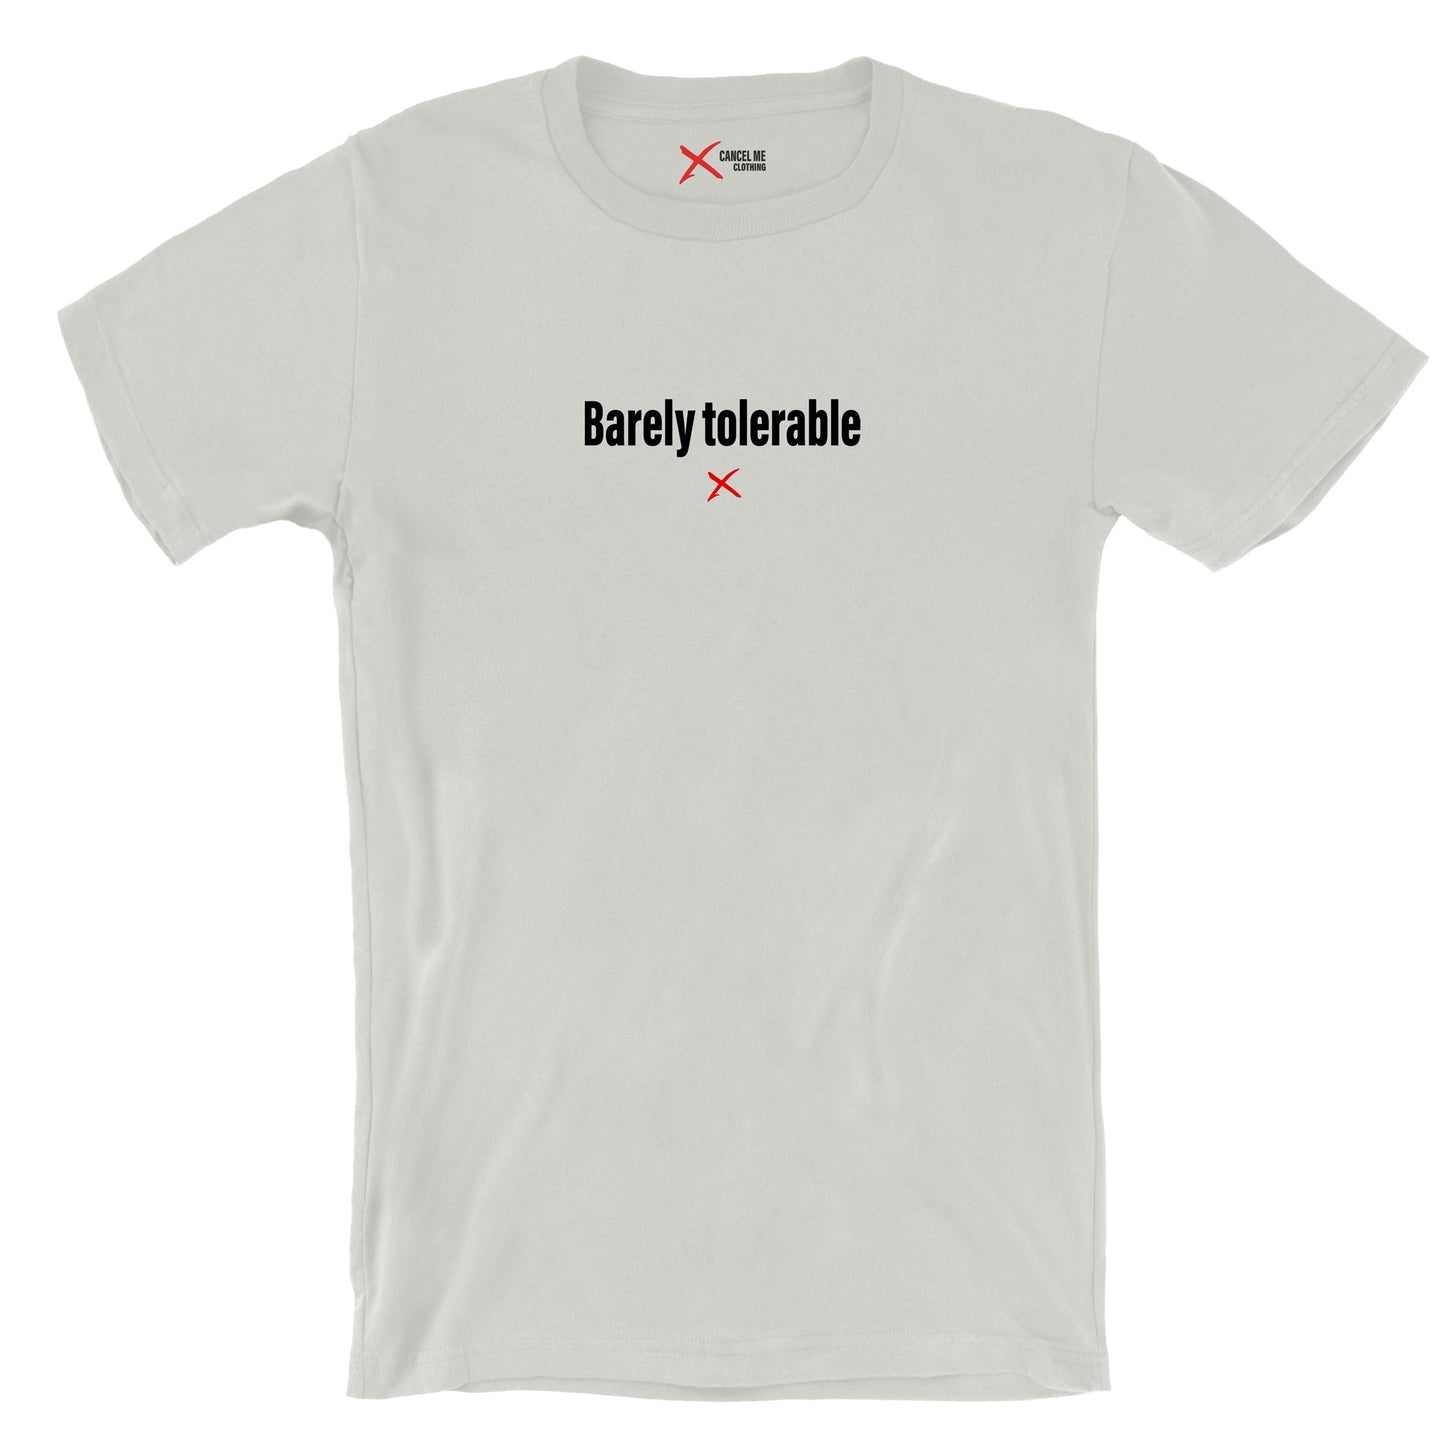 Barely tolerable - Shirt